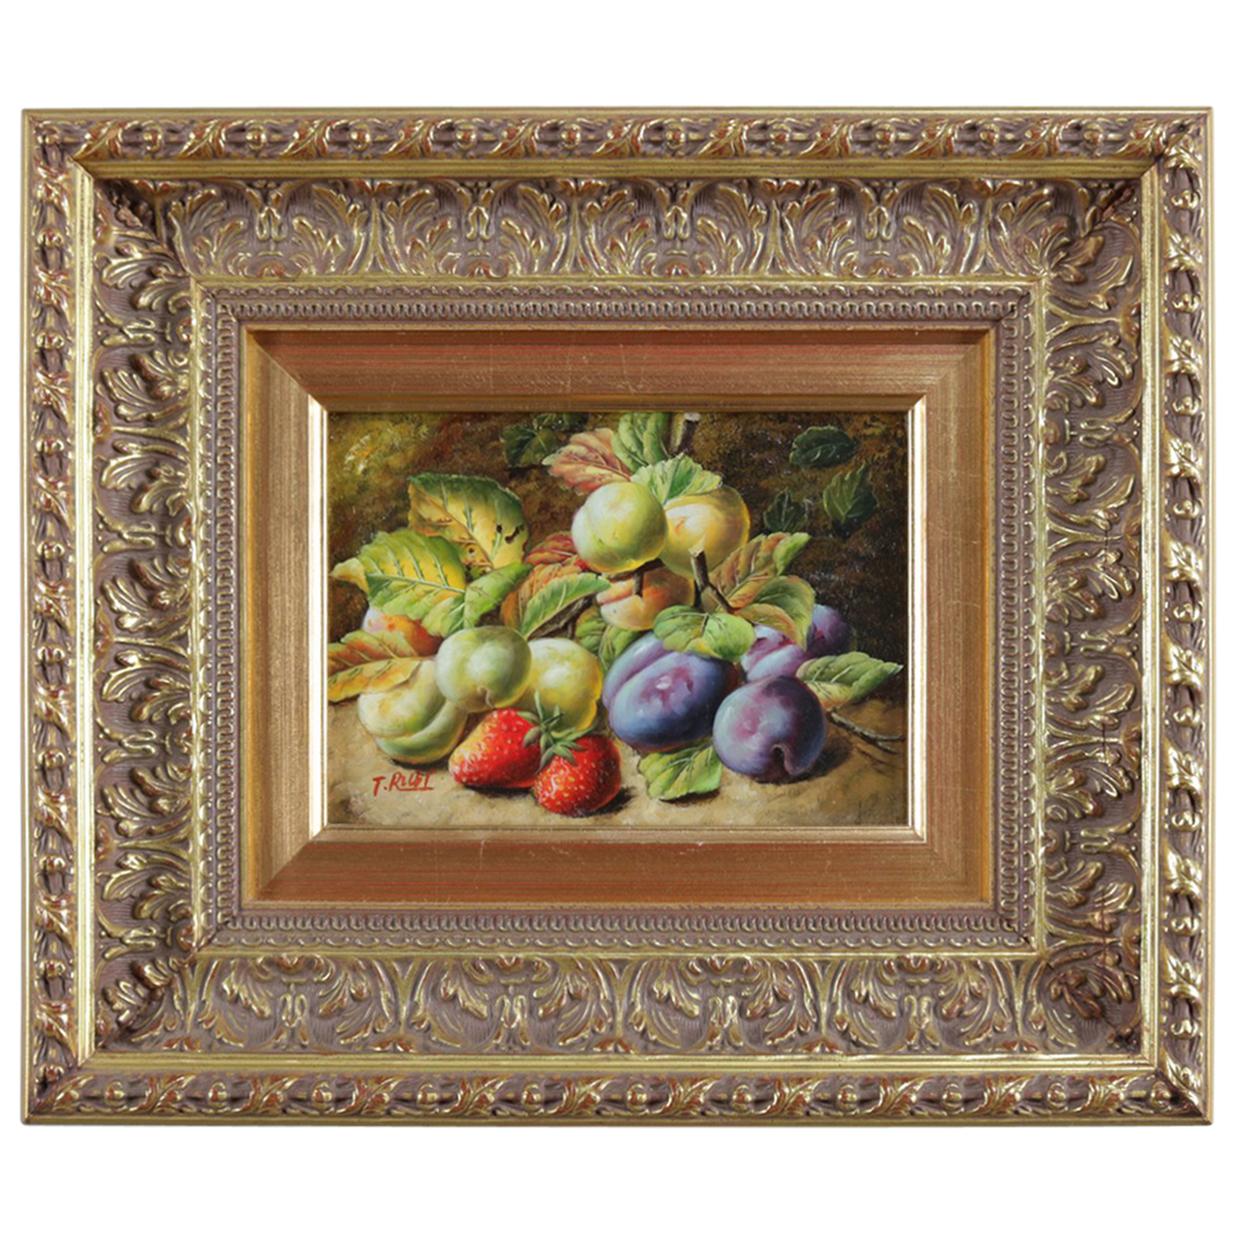 Oil on Board Fruit and Foliate Still Life Painting, Signed P. Rui, 20th Century